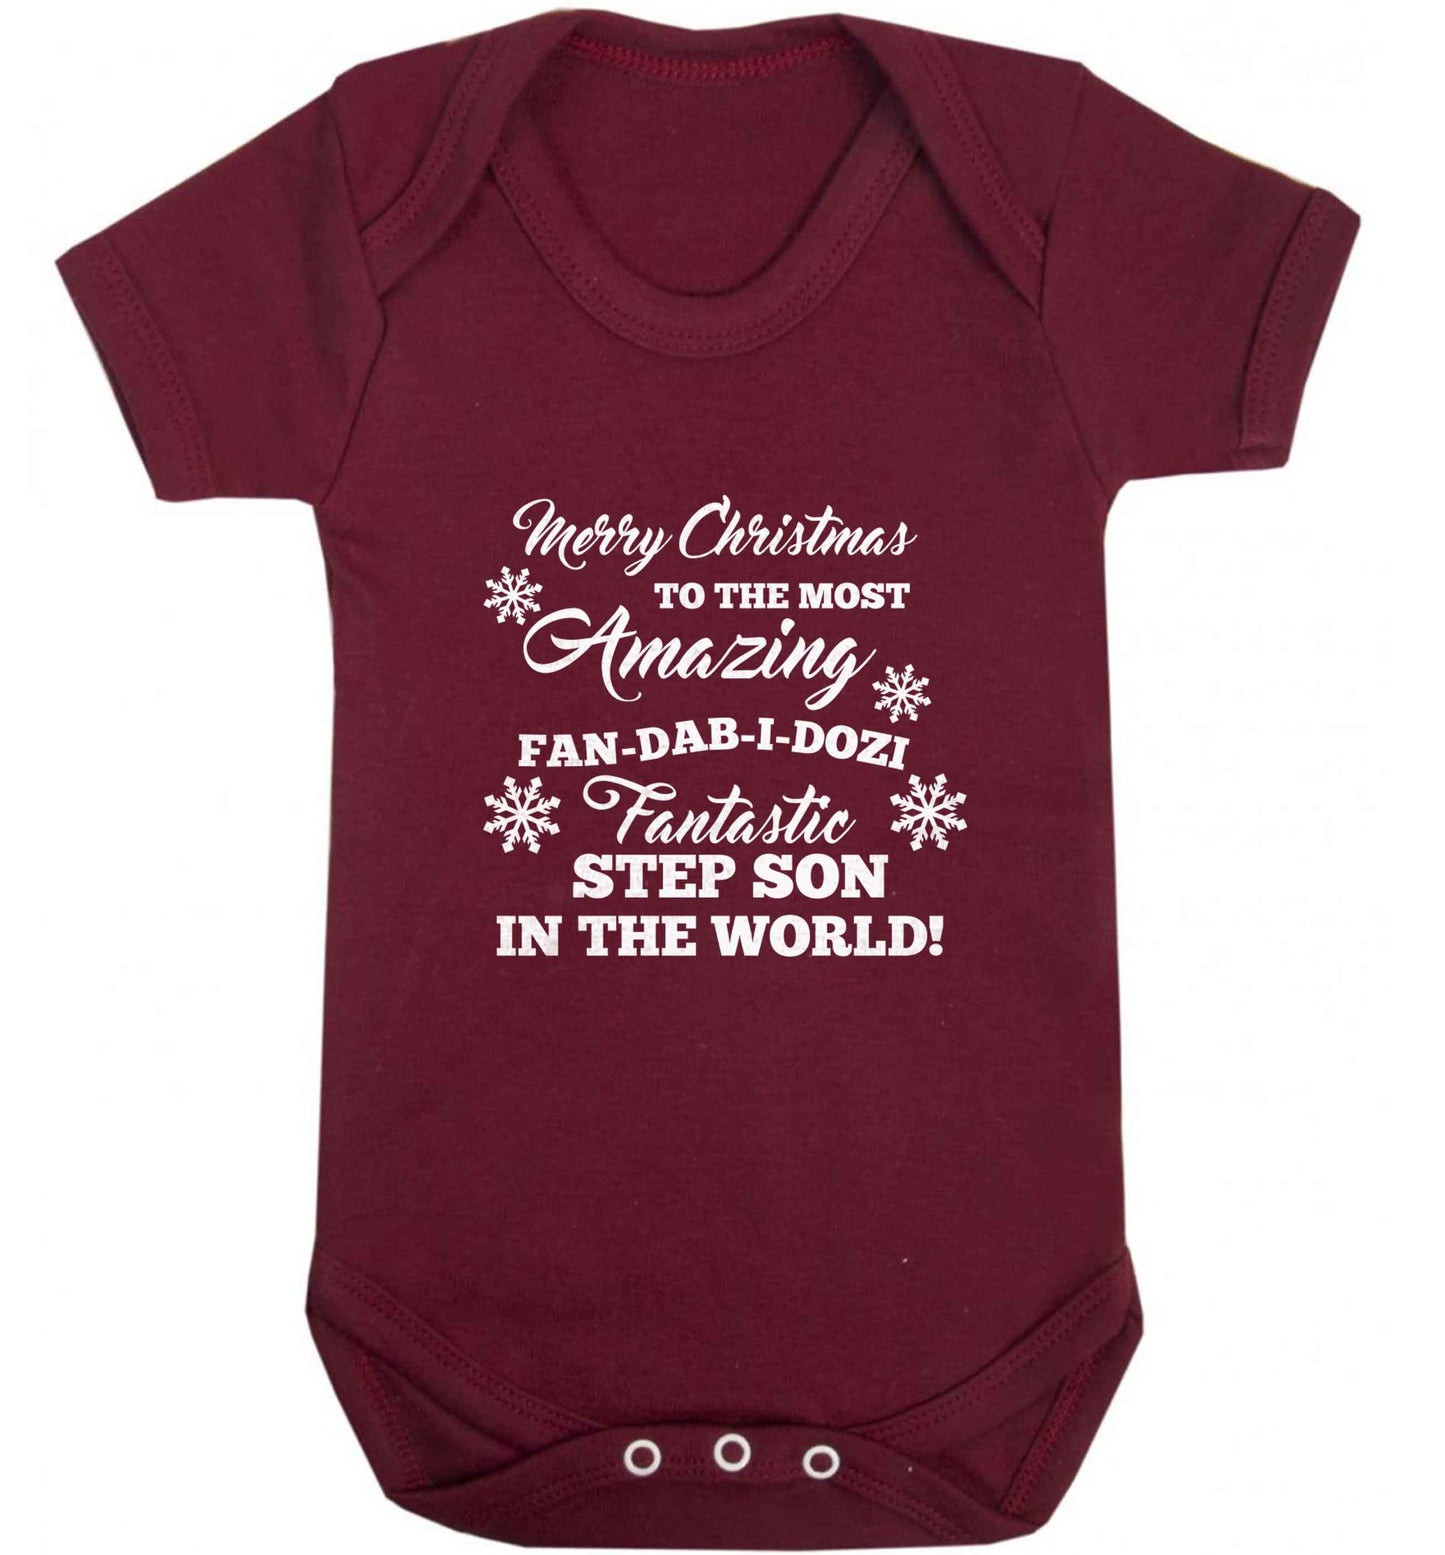 Merry Christmas to the most amazing fan-dab-i-dozi fantasic Step Son in the world baby vest maroon 18-24 months